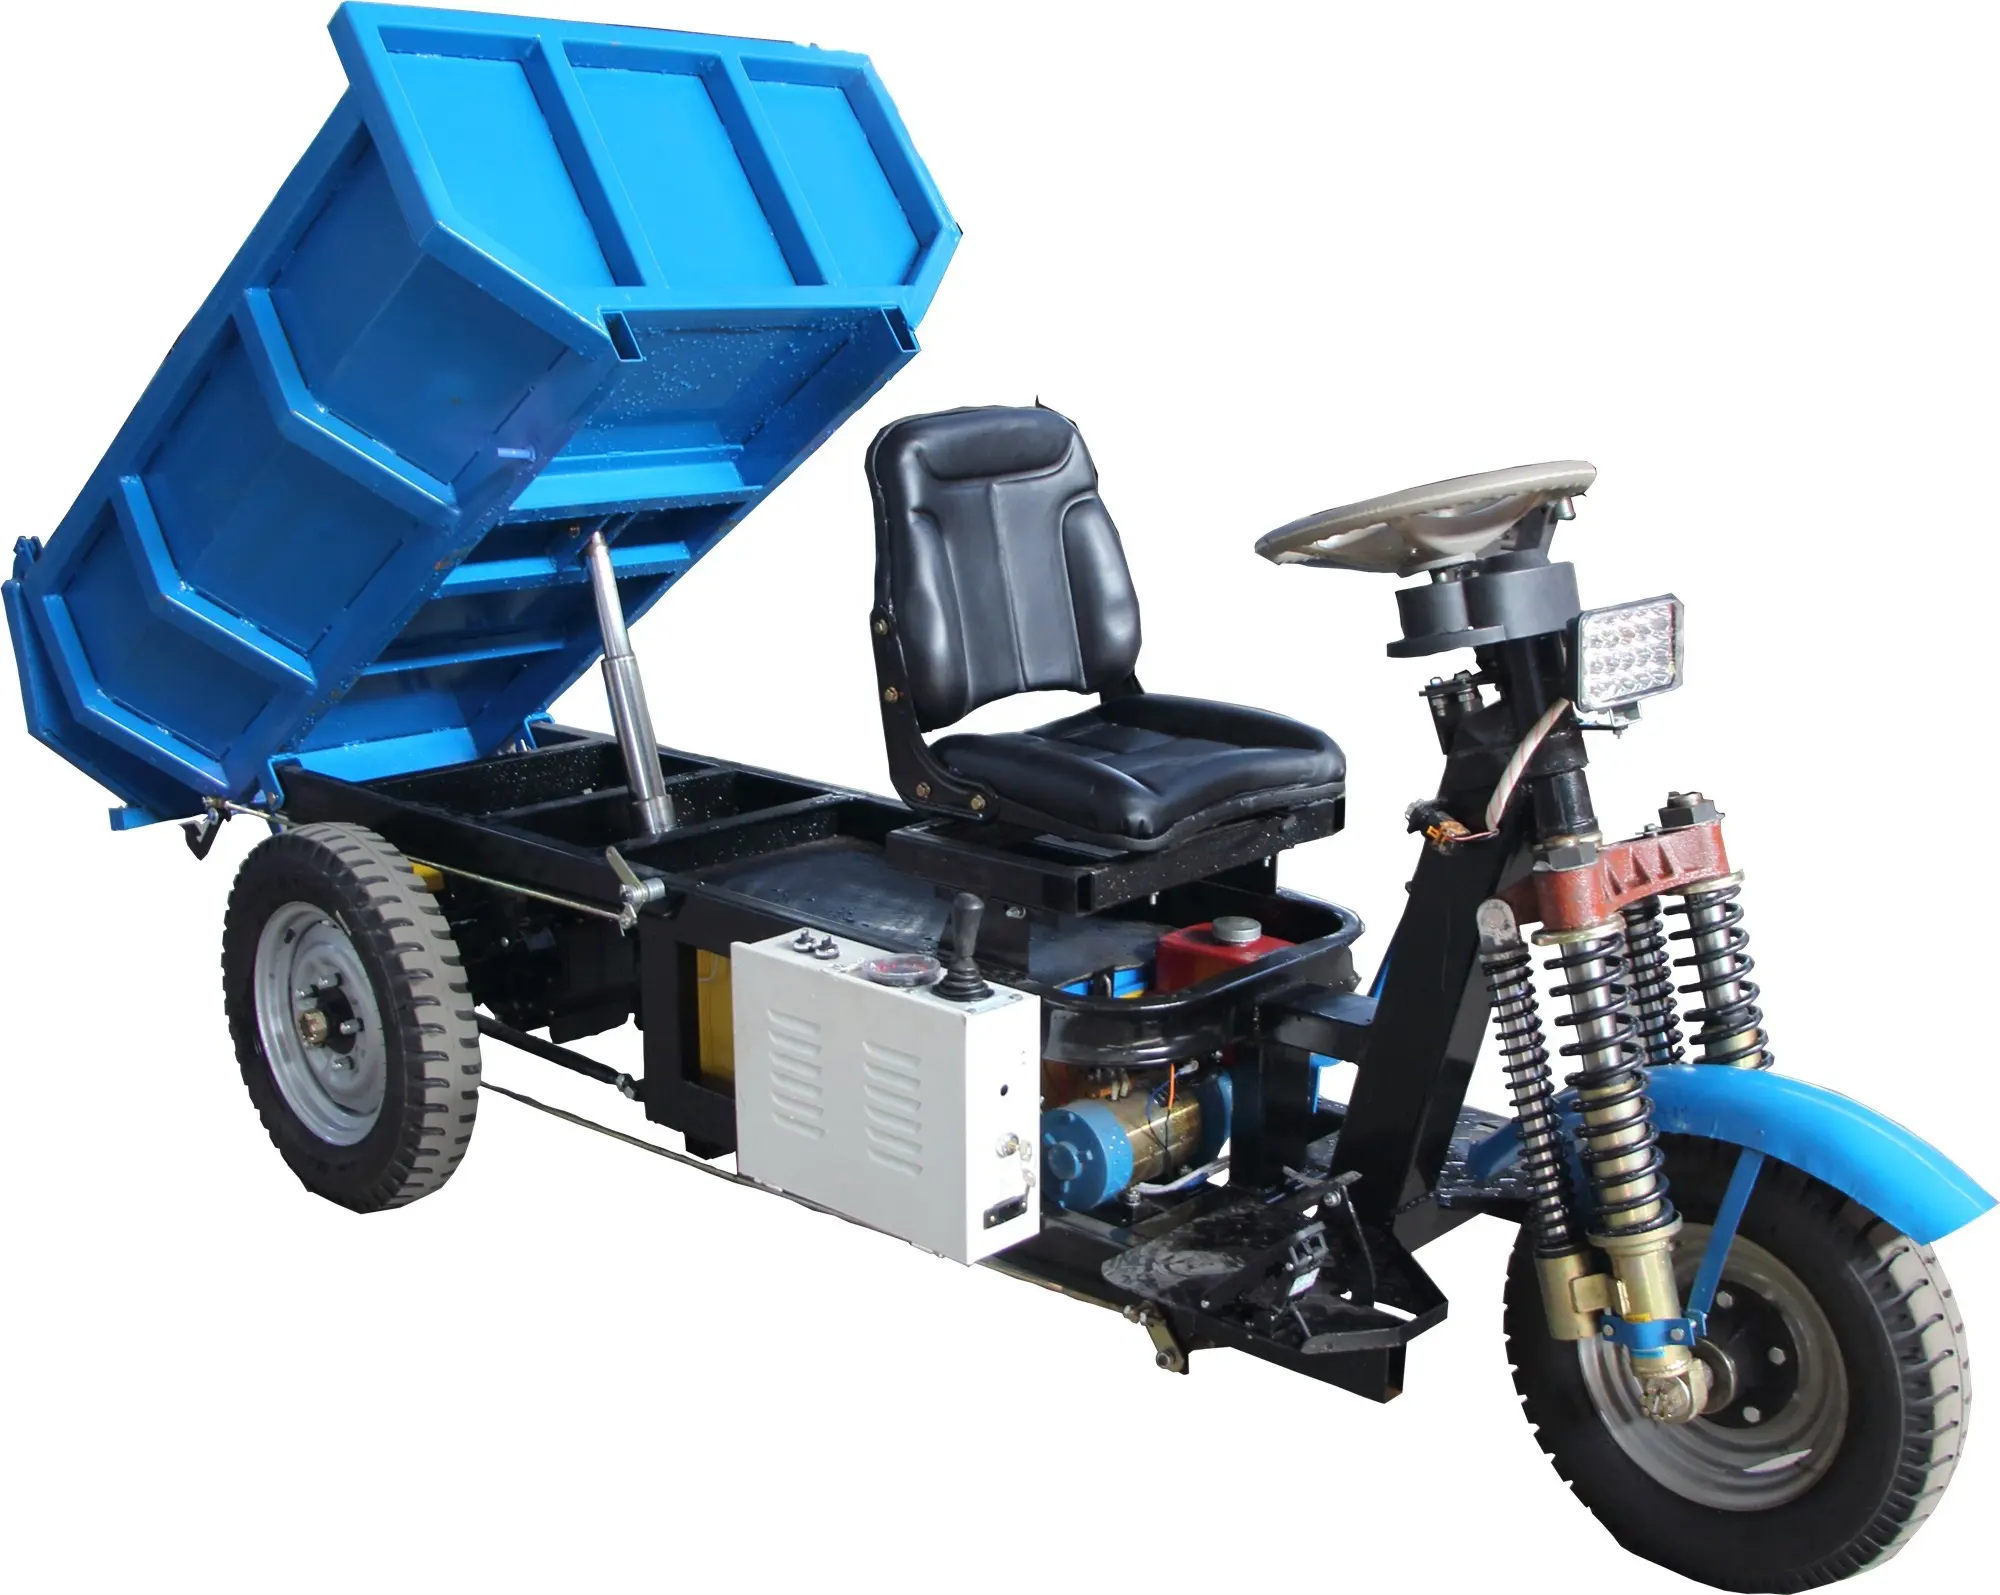 1000W moteur cargo tricycle avec cabine/2000W 3 roues mining tricycle/trois roues tricycle moto